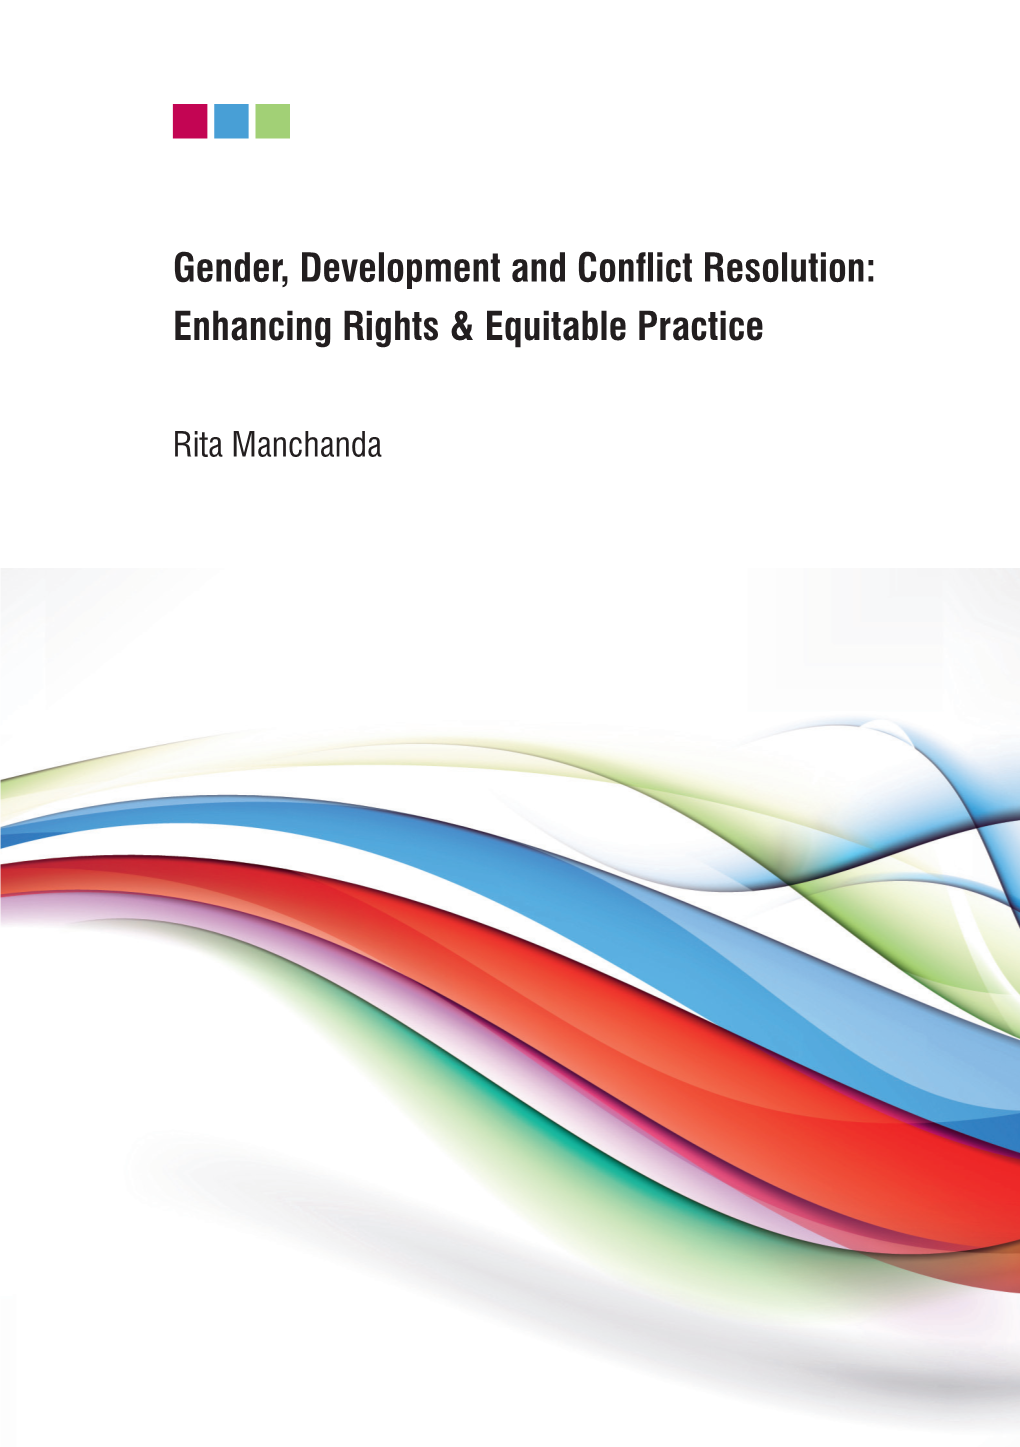 Gender, Development and Conflict Resolution: Enhancing Rights & Equitable Practice